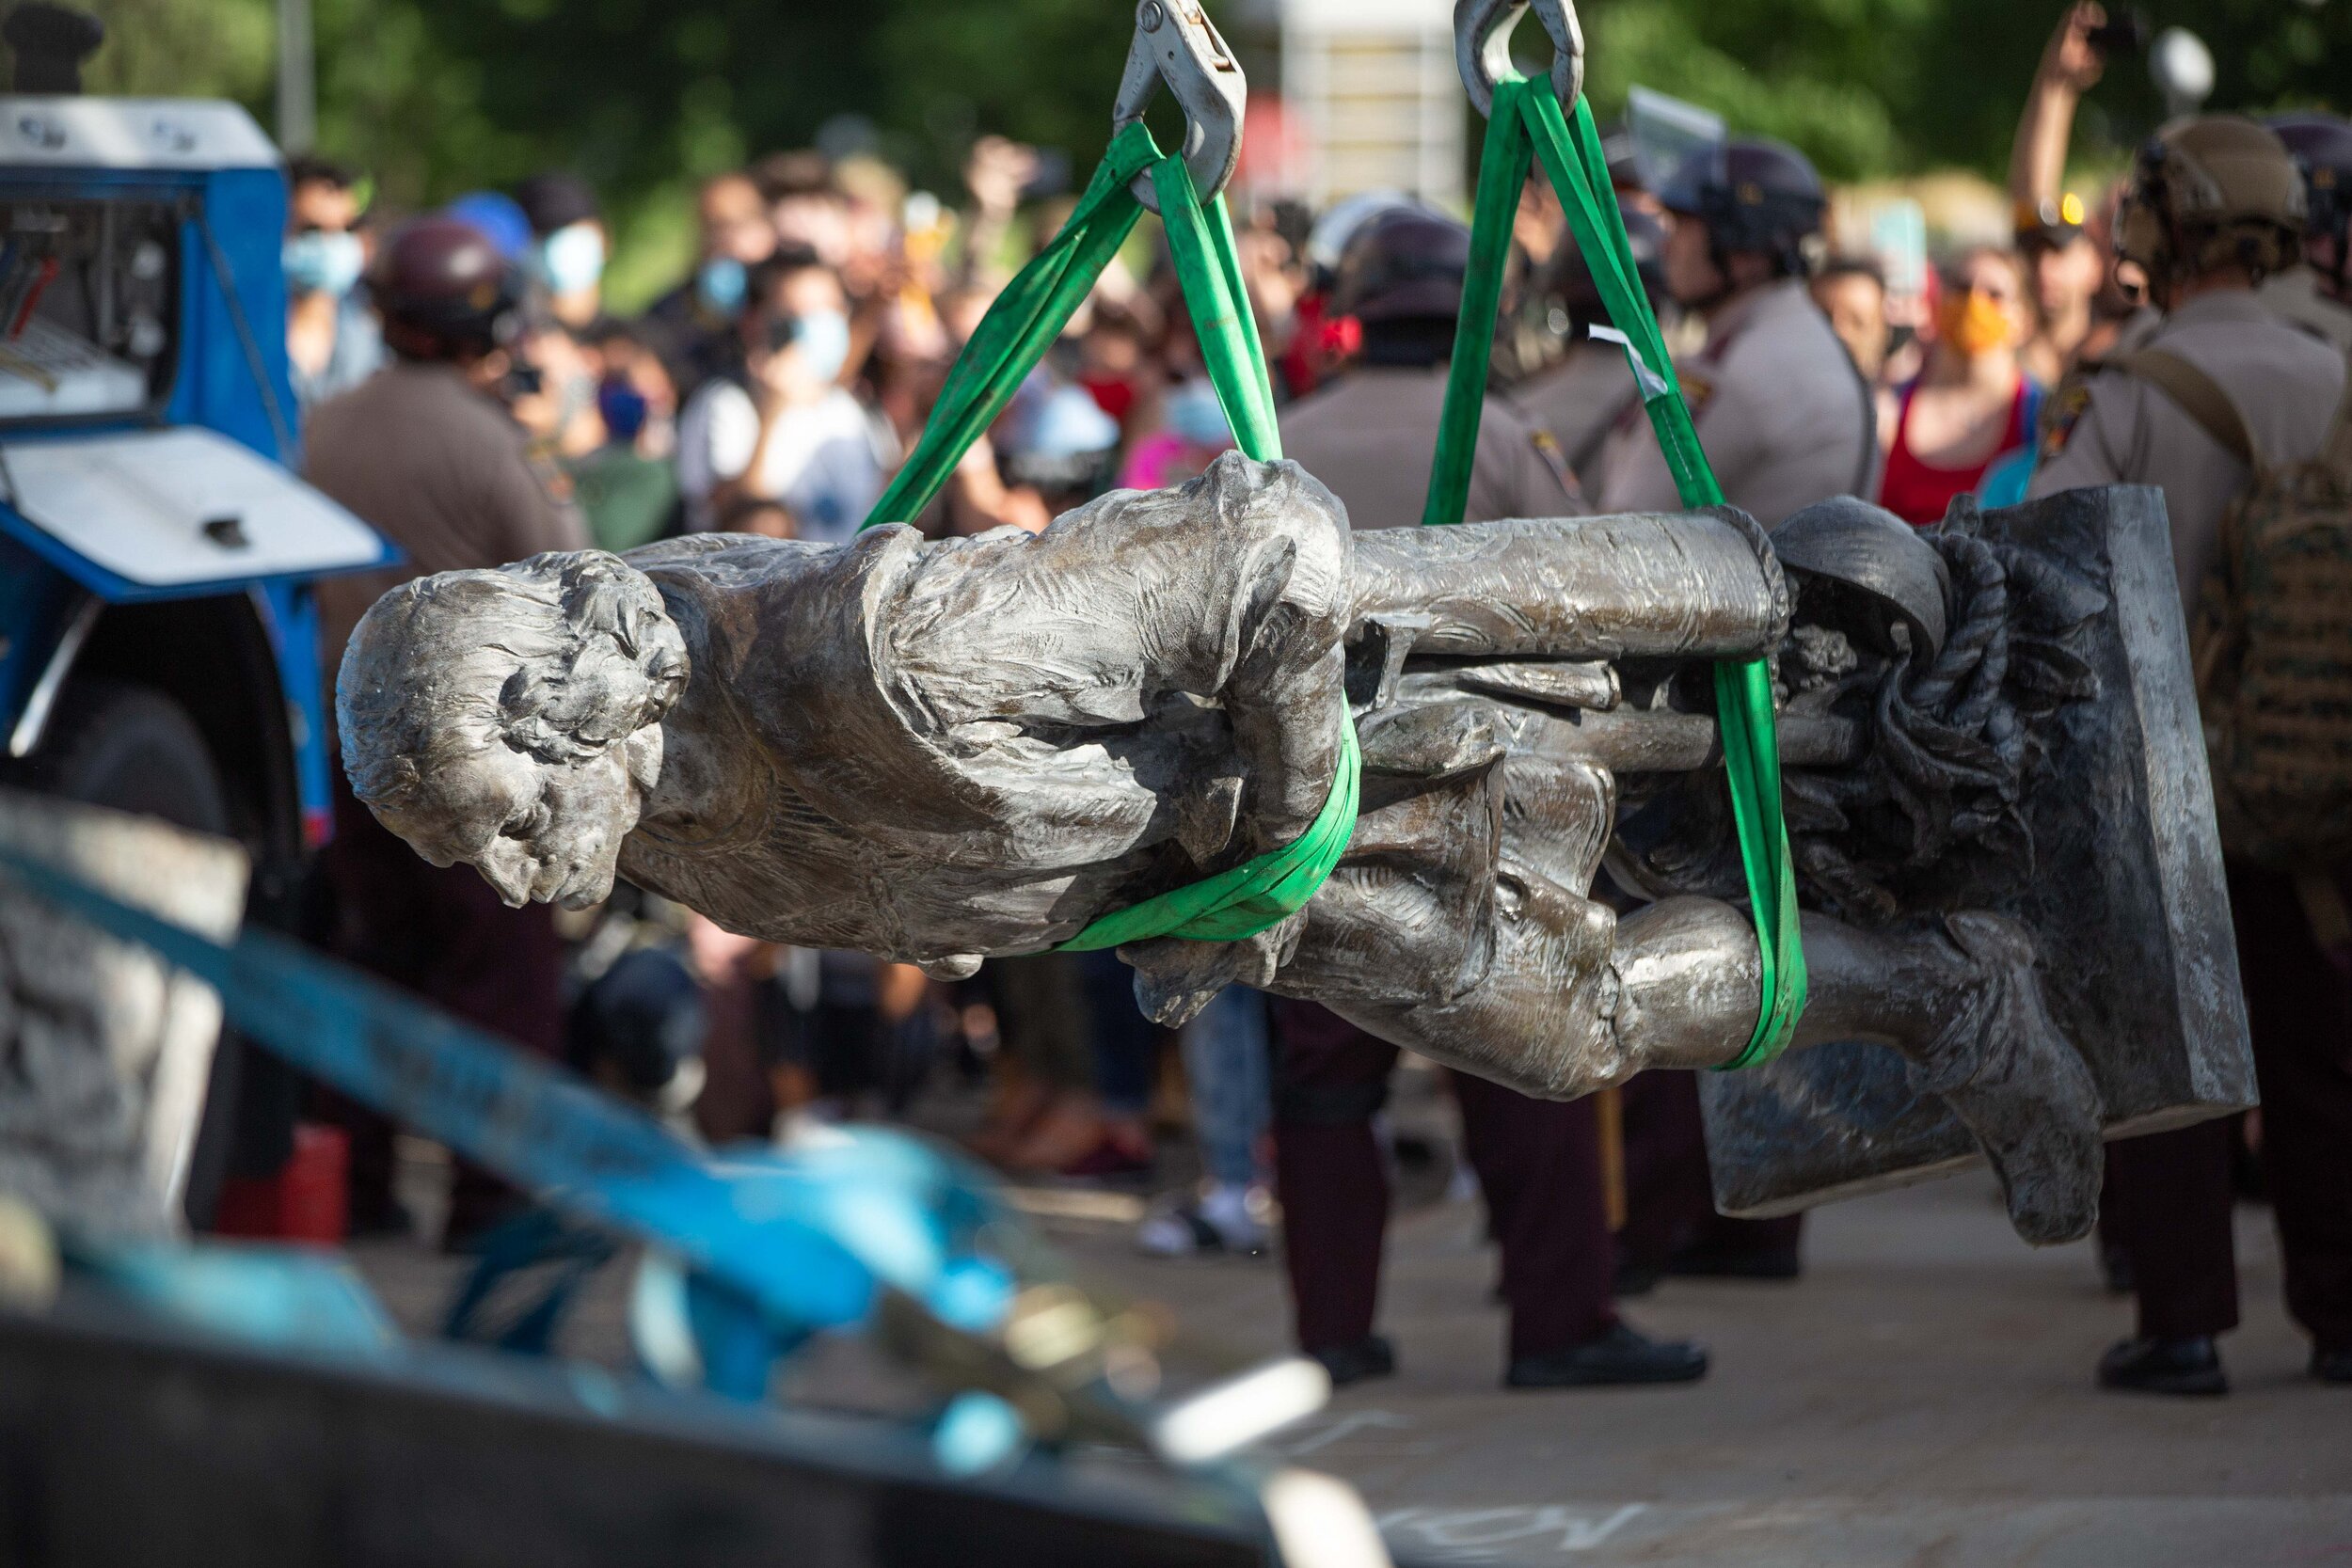  Held up in the air, the statue of Christopher Columbus gets ready to be put on the flatbed where it will be removed from the grounds after it was torn down by activists in Saint Paul, Minnesota on Jun 10, 2020. 